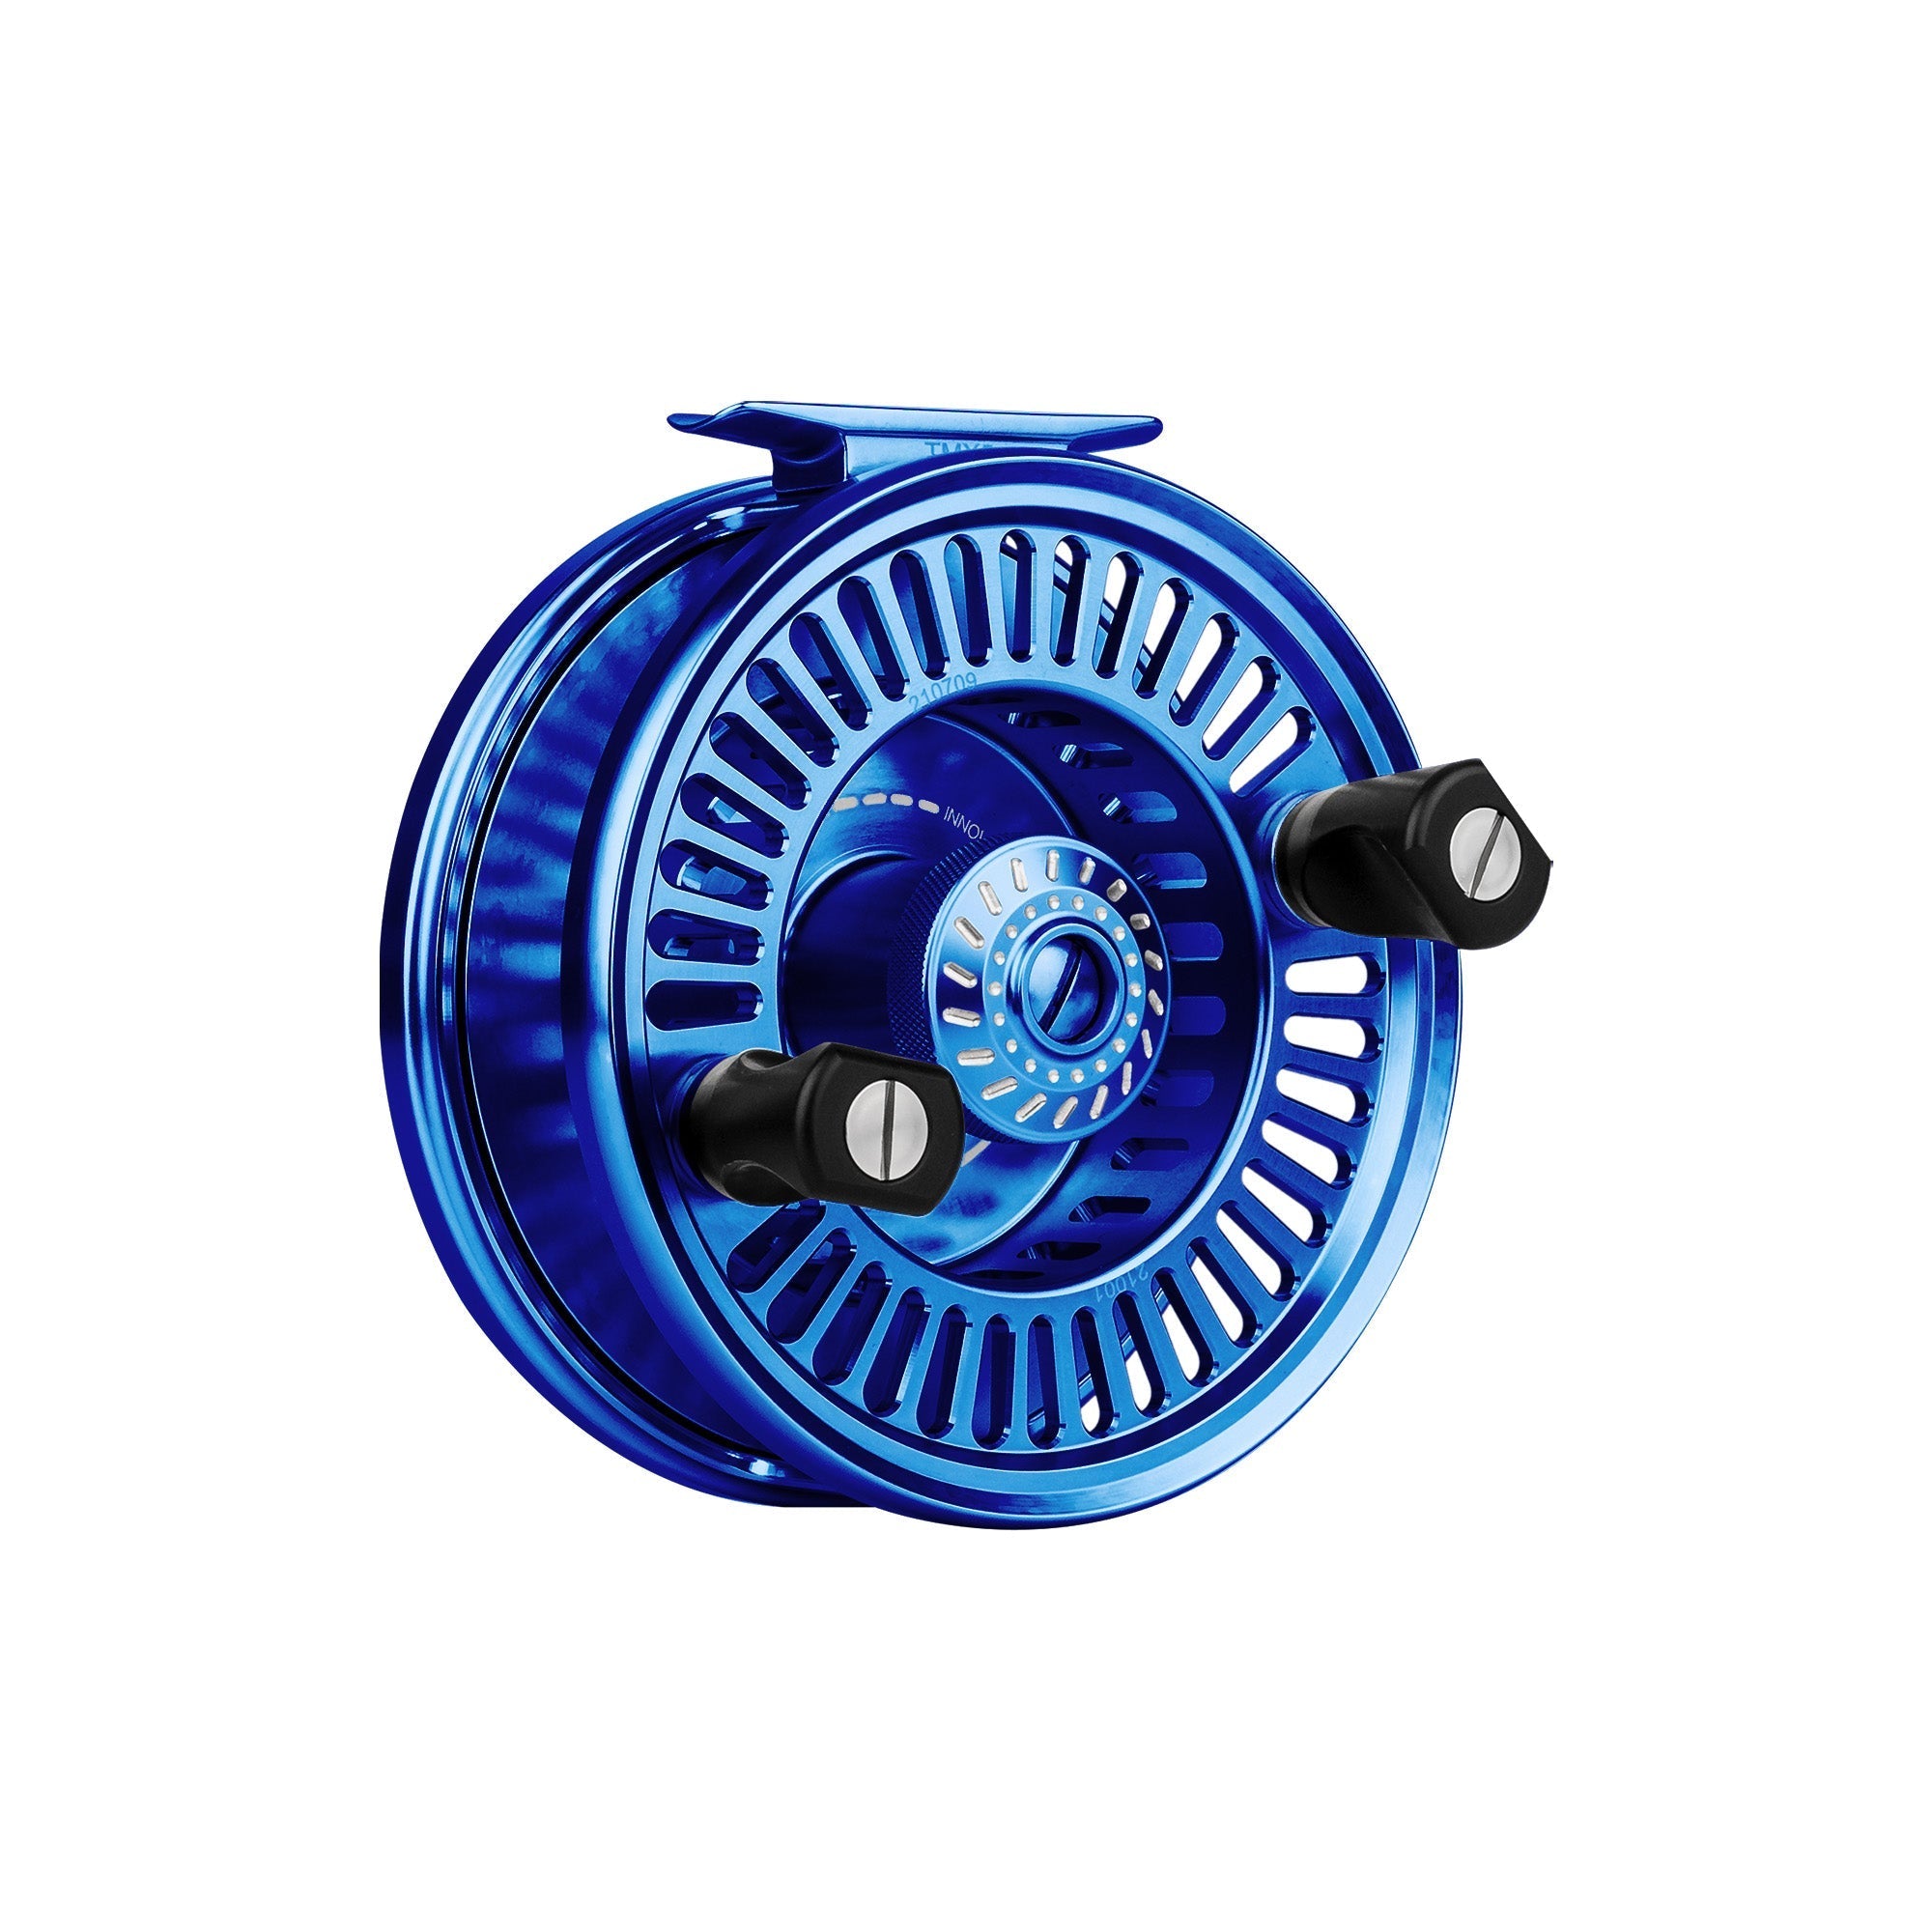 Amundson Outdoor Trend X5 Mooching Reel in Blue w/ Paddle Handle